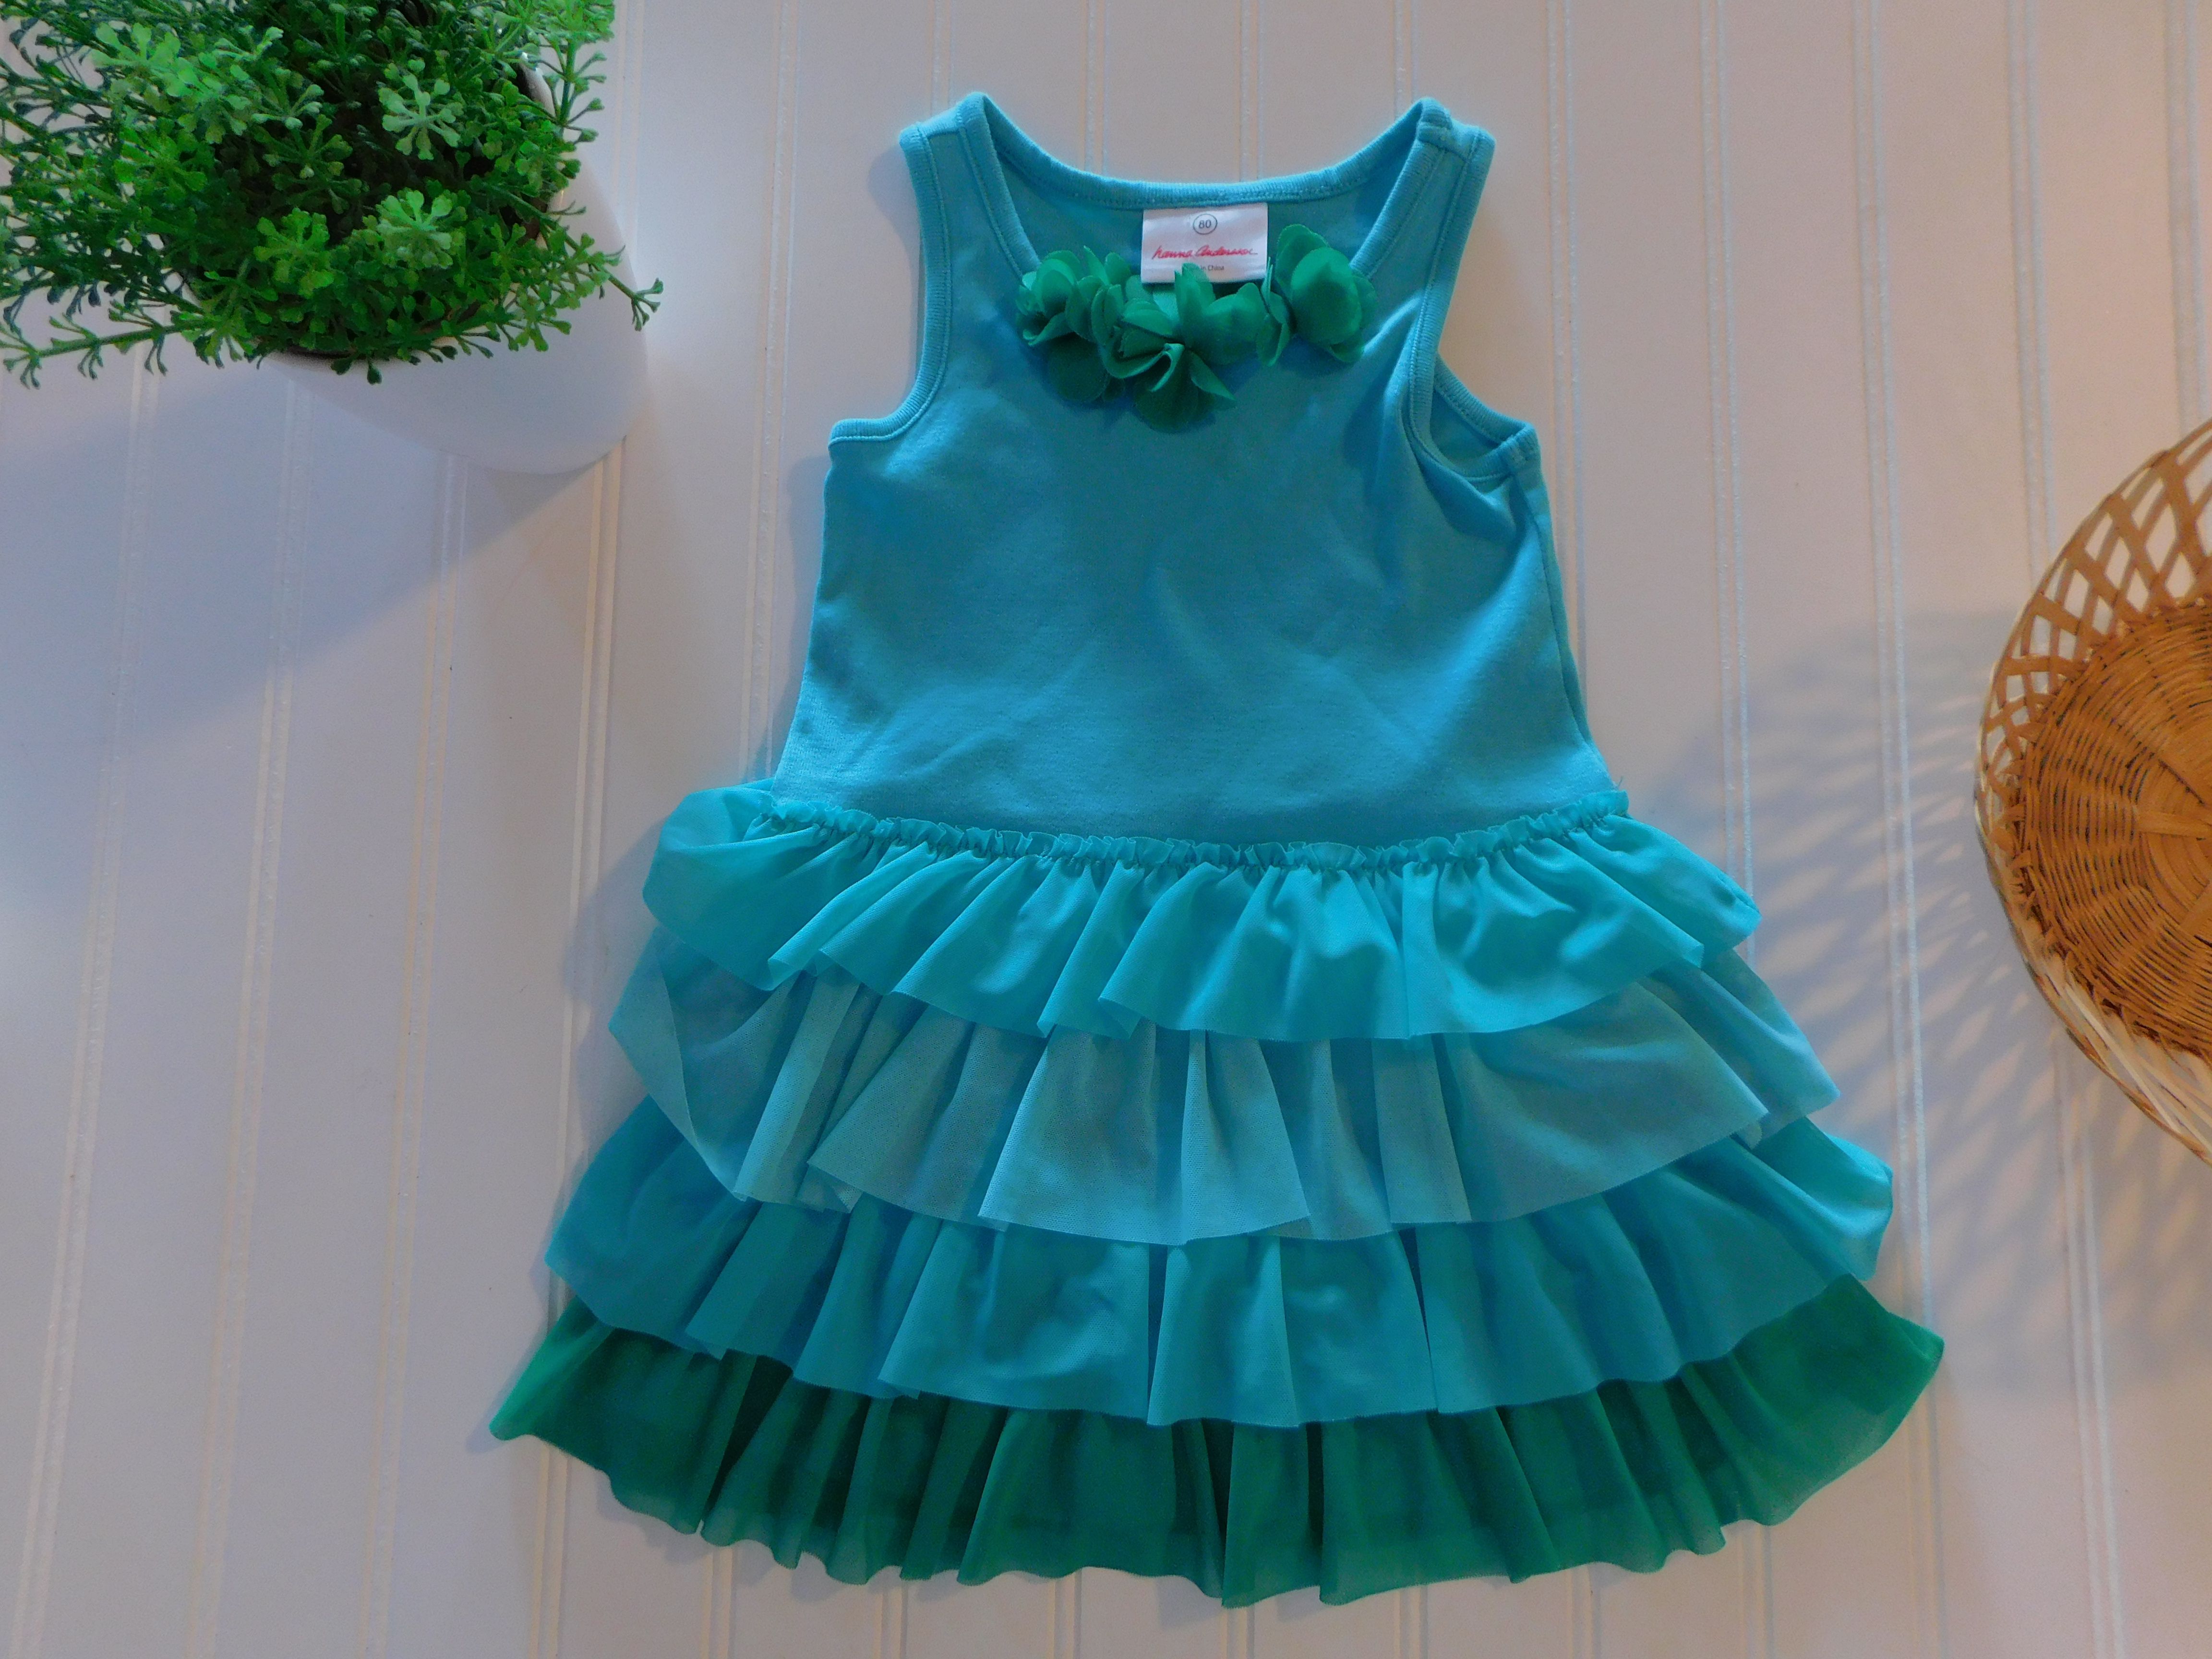 Hanna Andersson Girls 80 18-24M Turquoise Soft Tulle Tiered Ruffle Dress